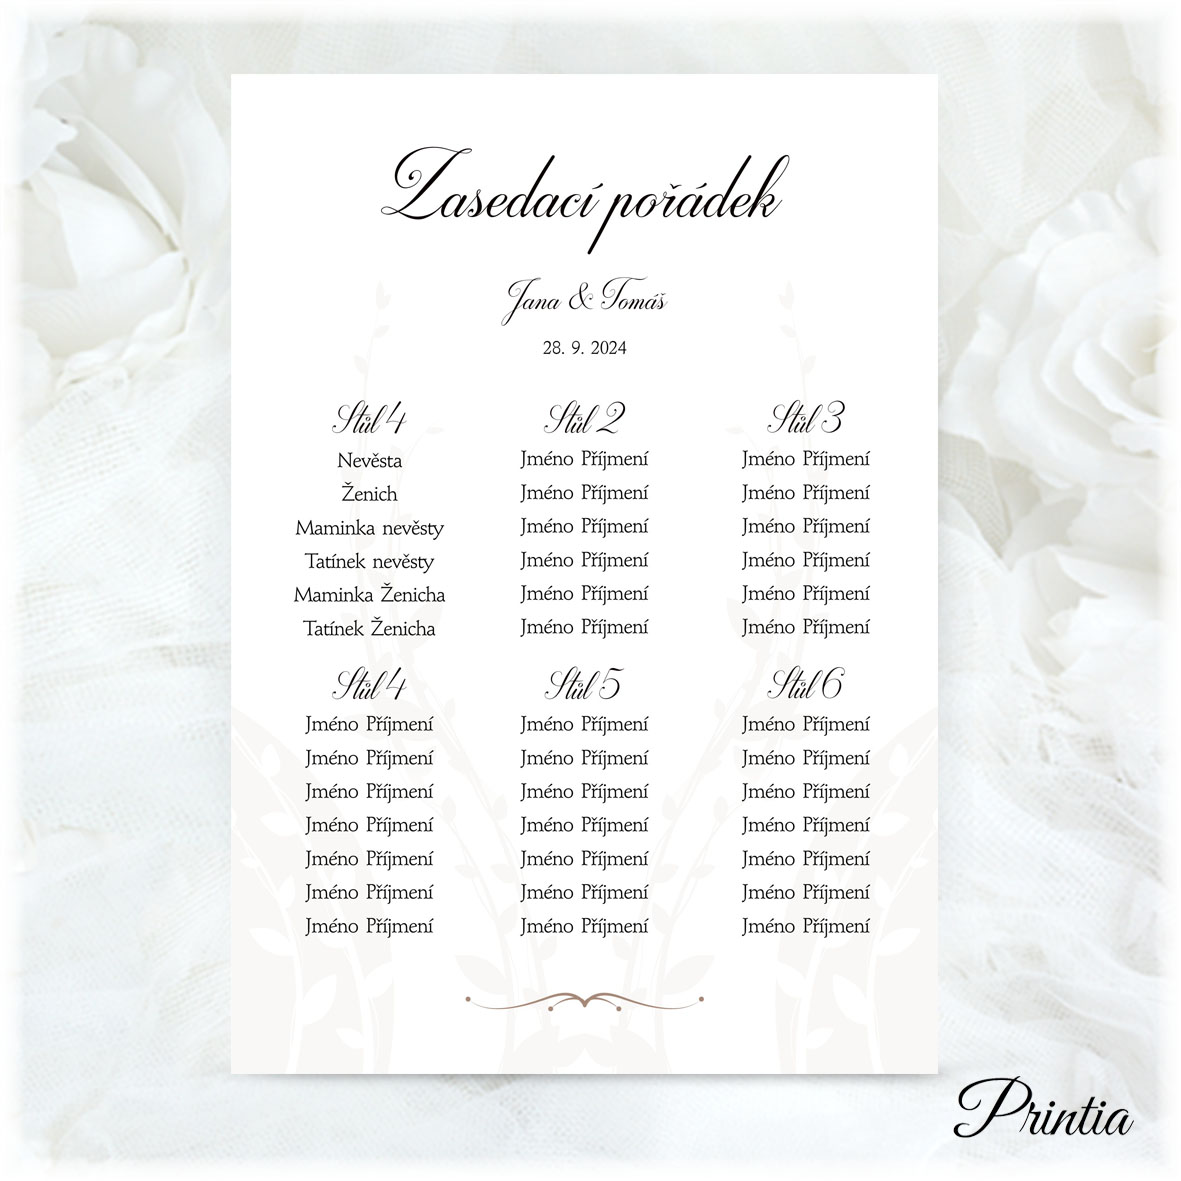 Wedding seating chart with ornament and light floral background 